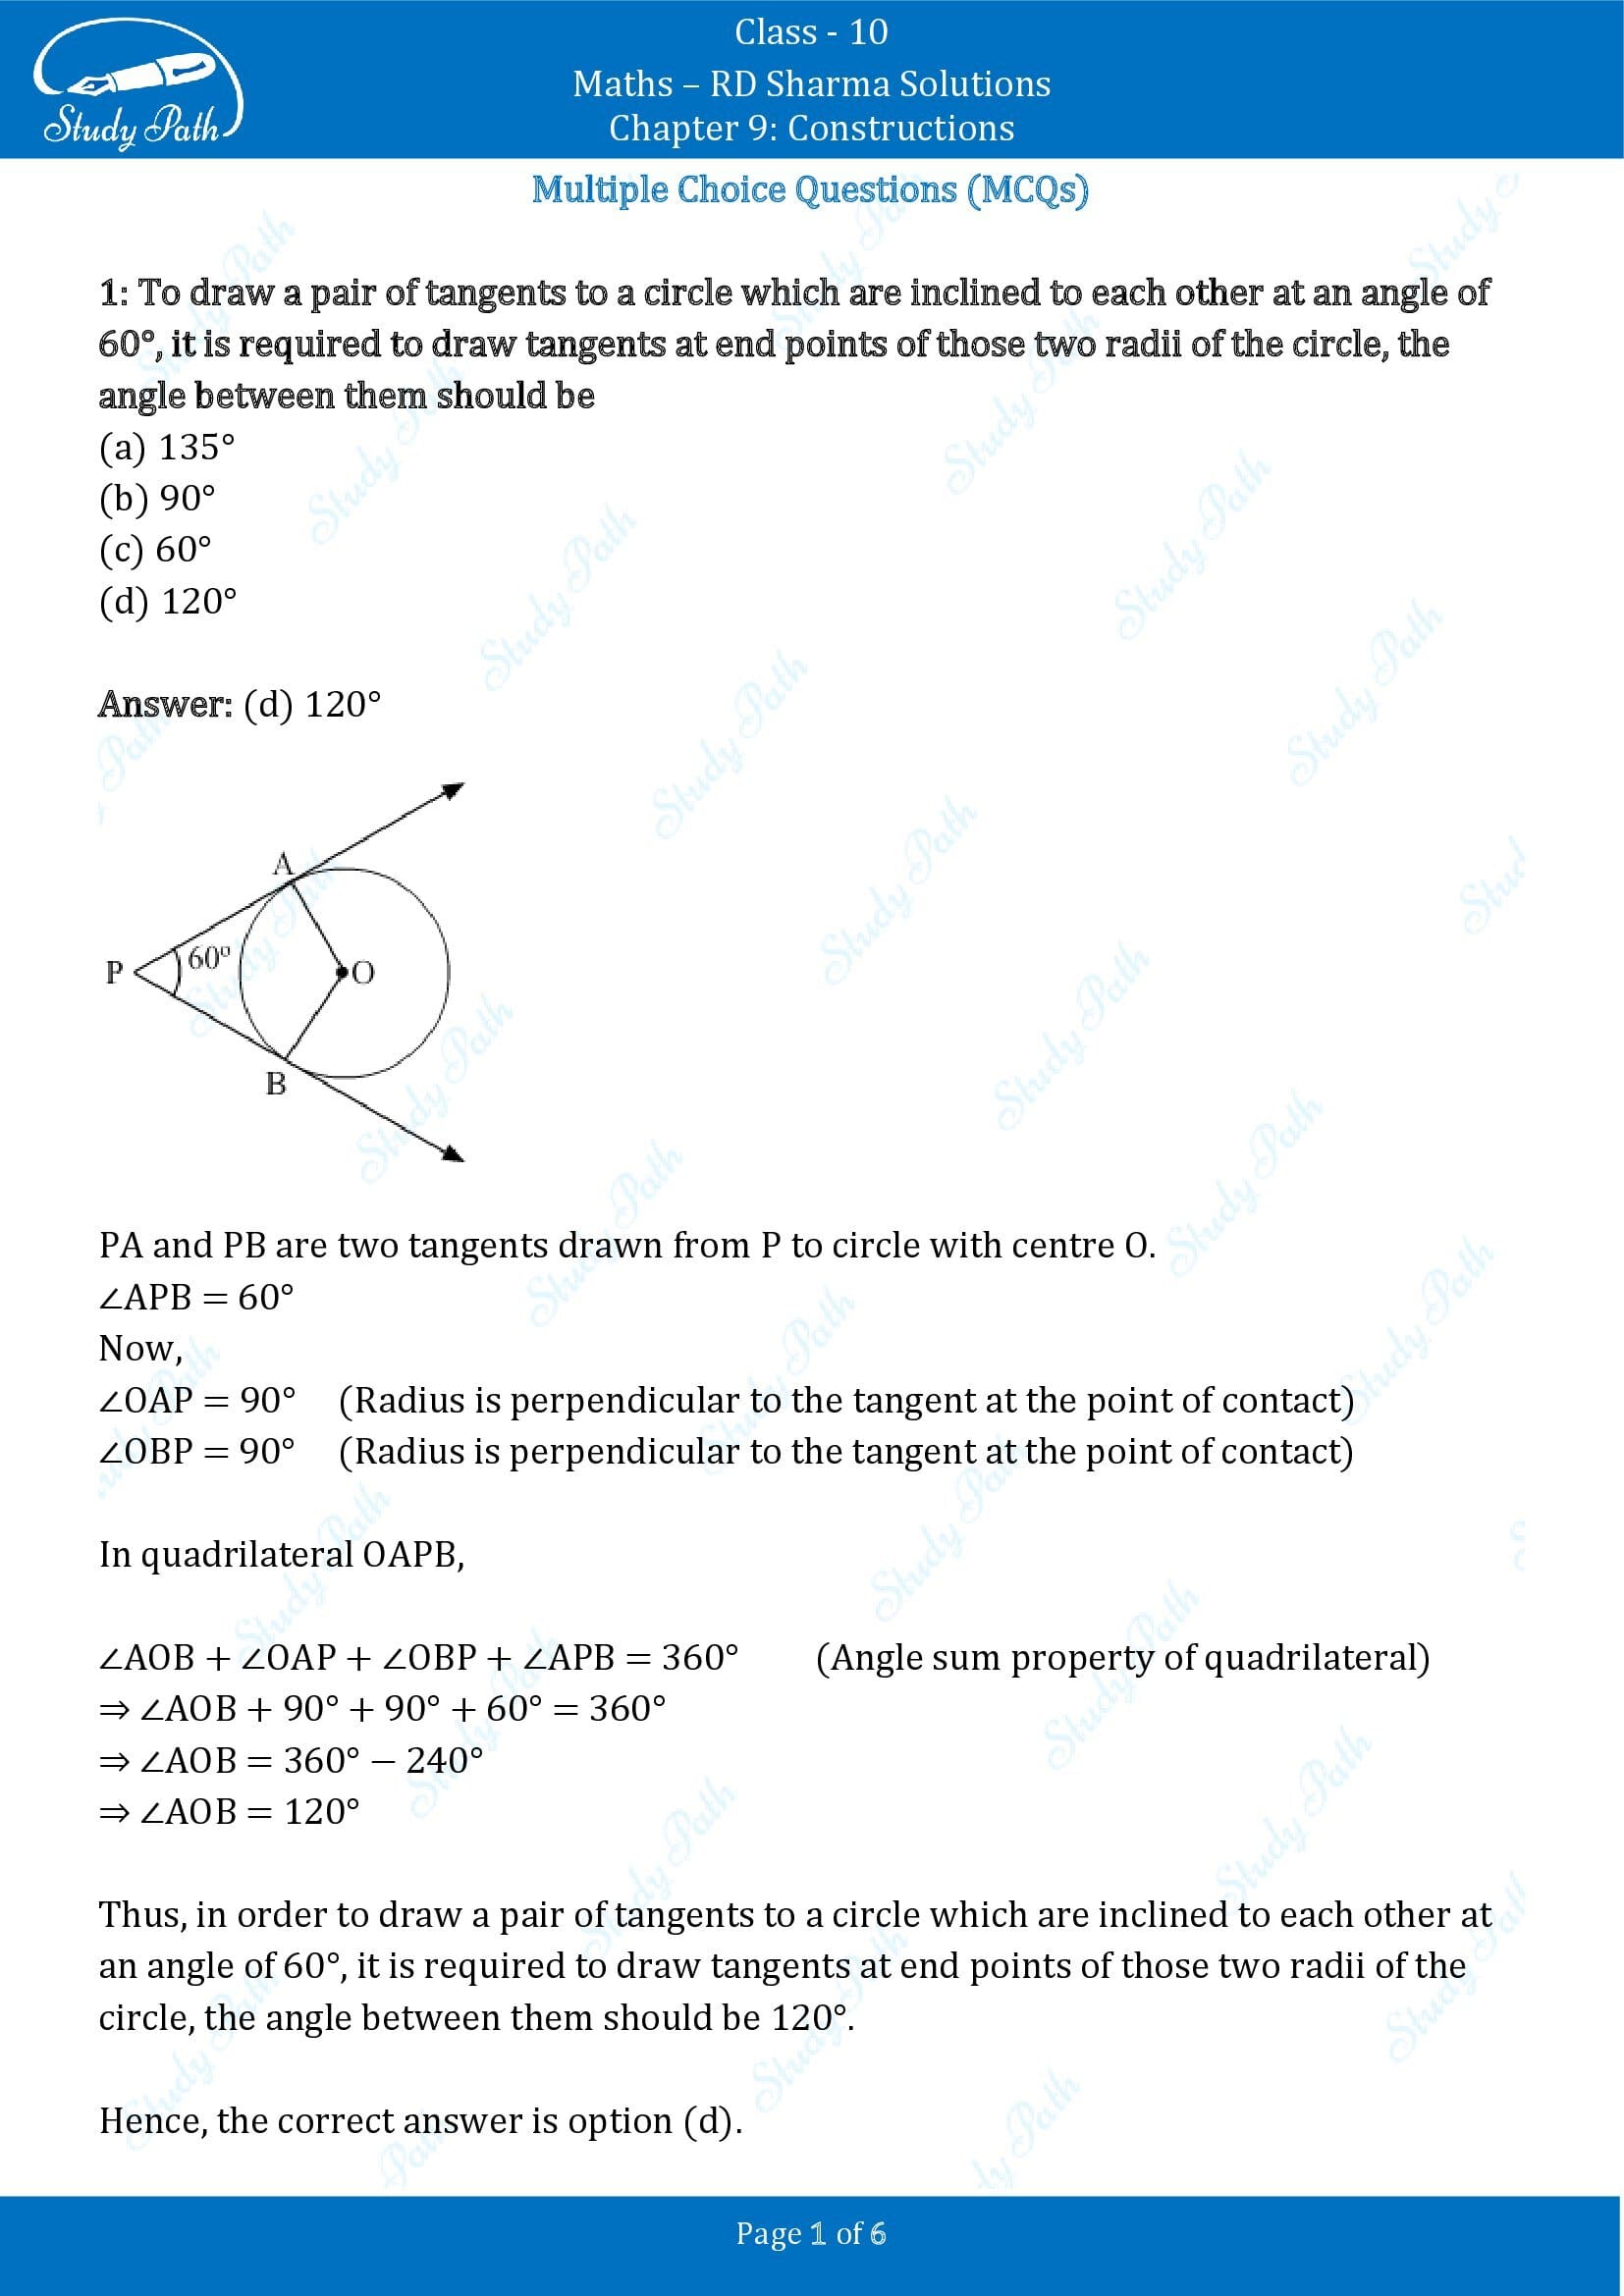 RD Sharma Solutions Class 10 Chapter 9 Constructions Multiple Choice Question MCQs 00001